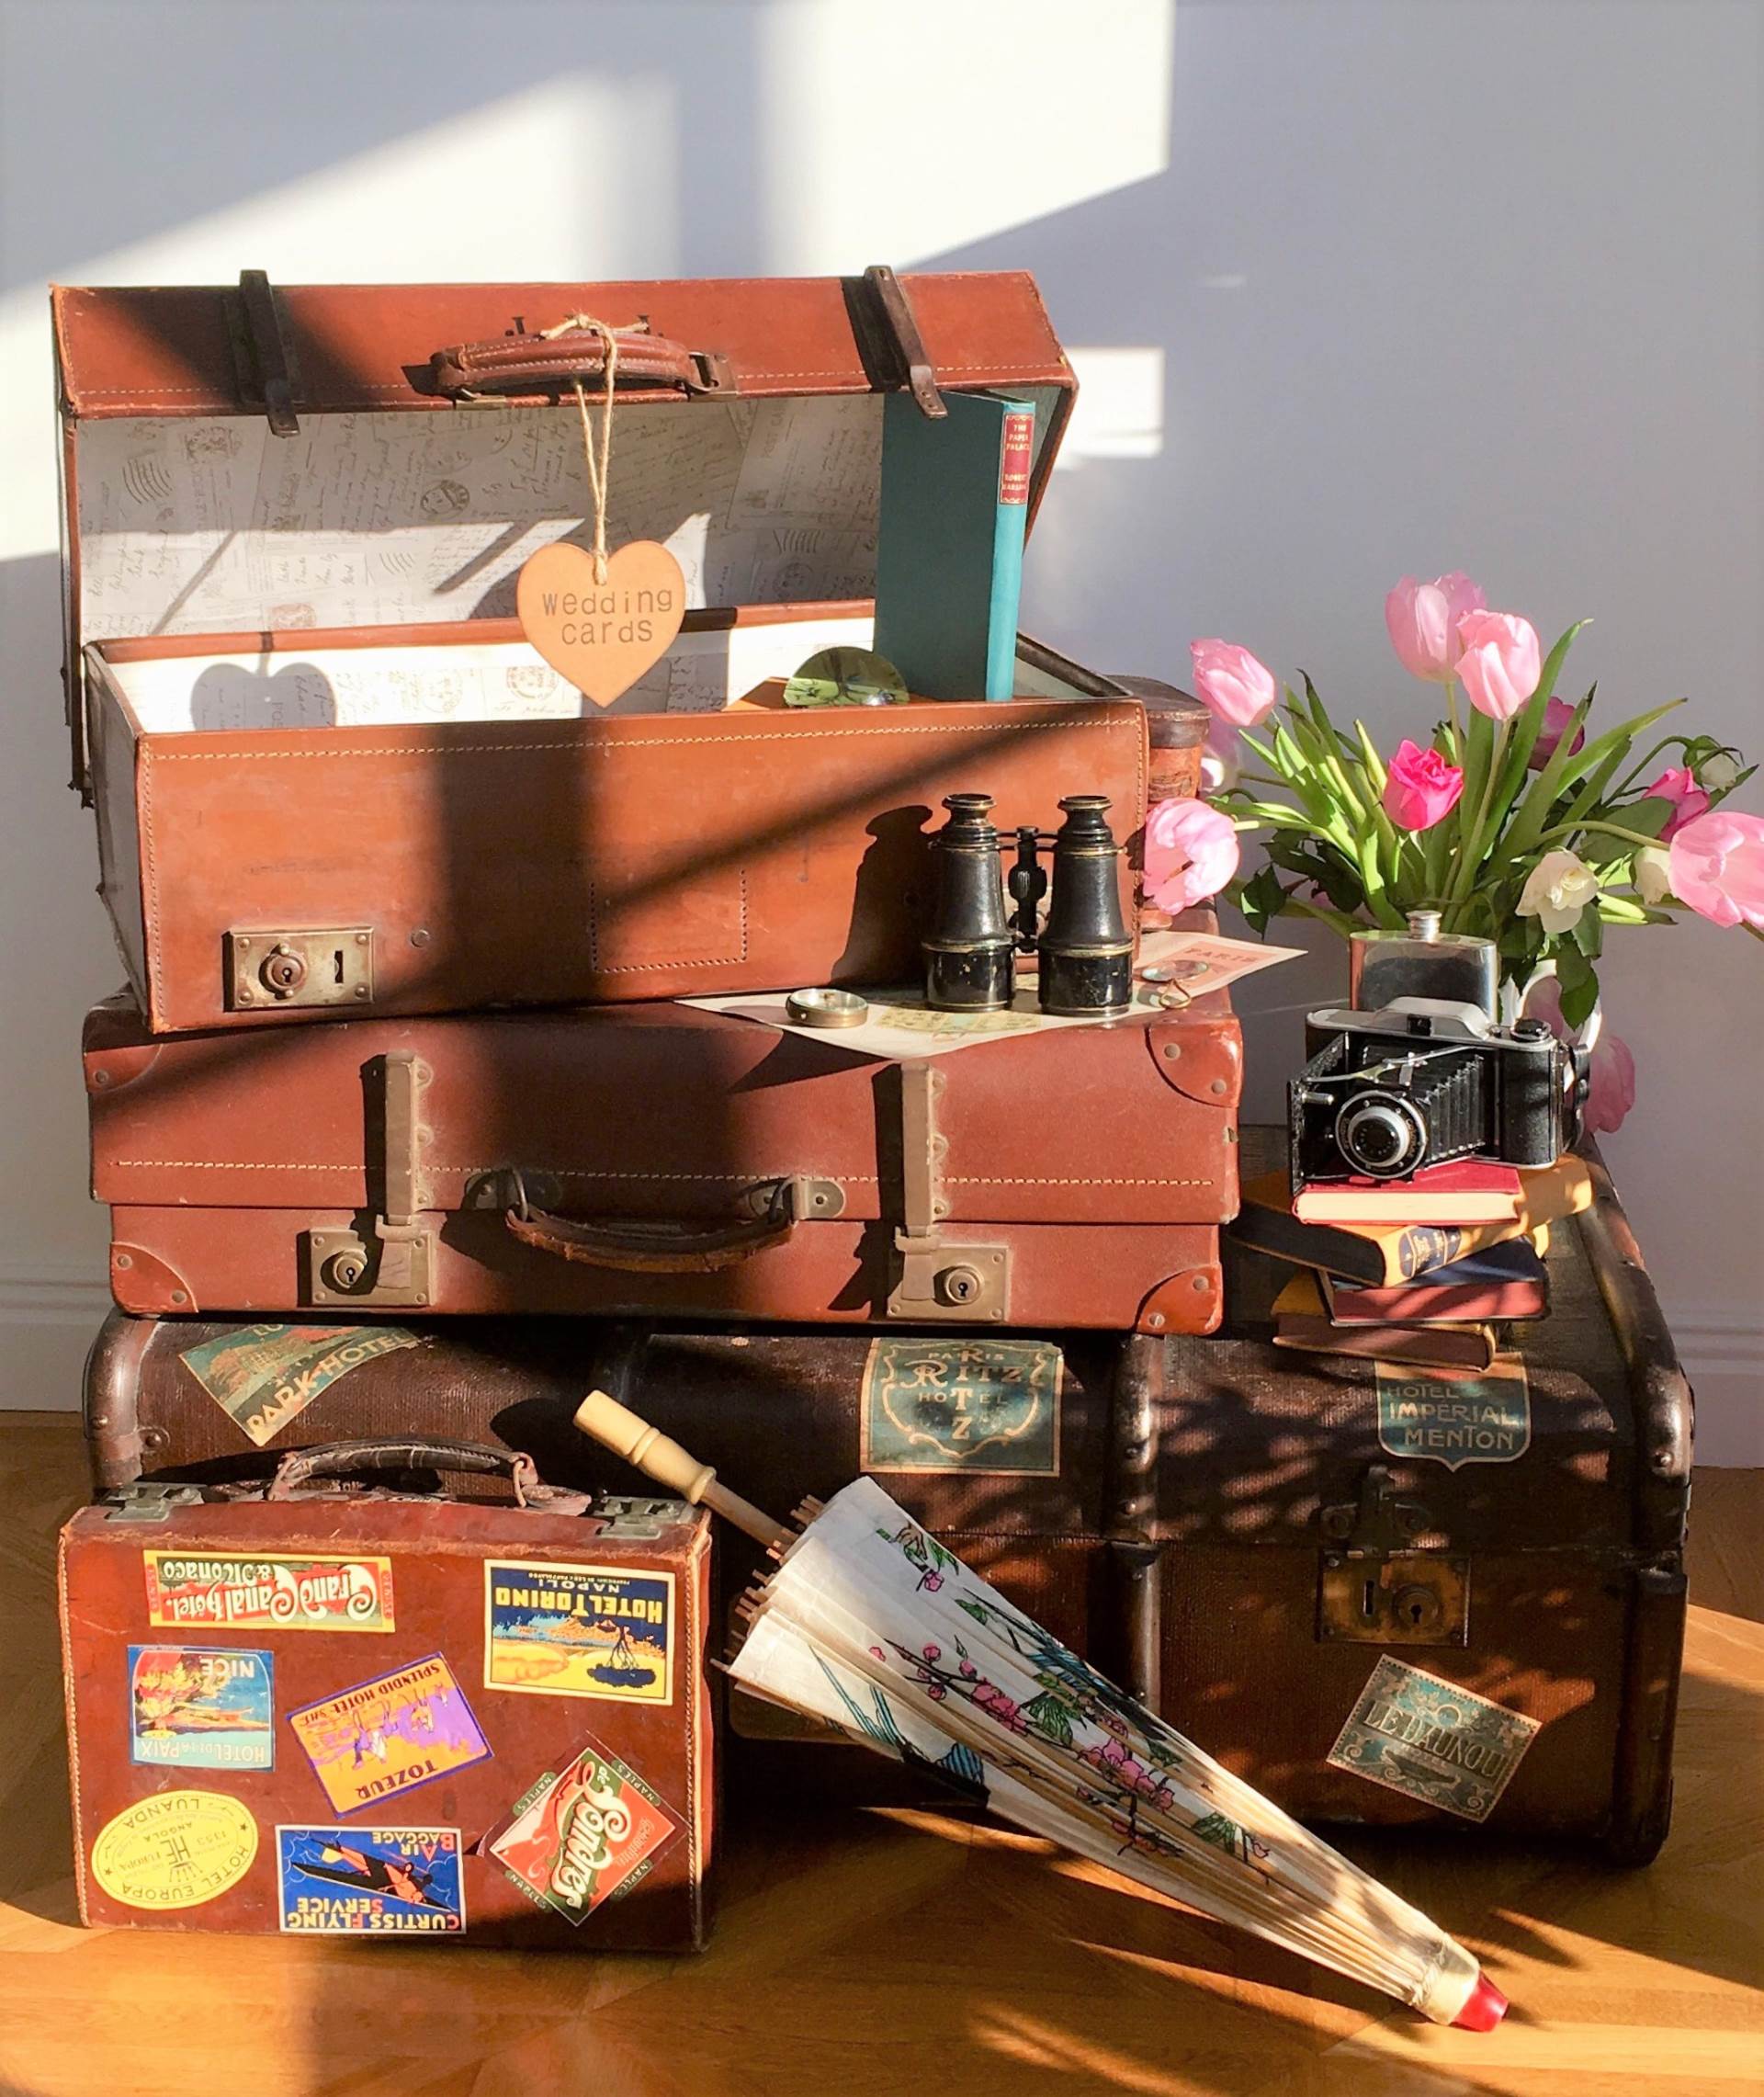 Styling ideas for a vintage wedding using suitcases for a card table